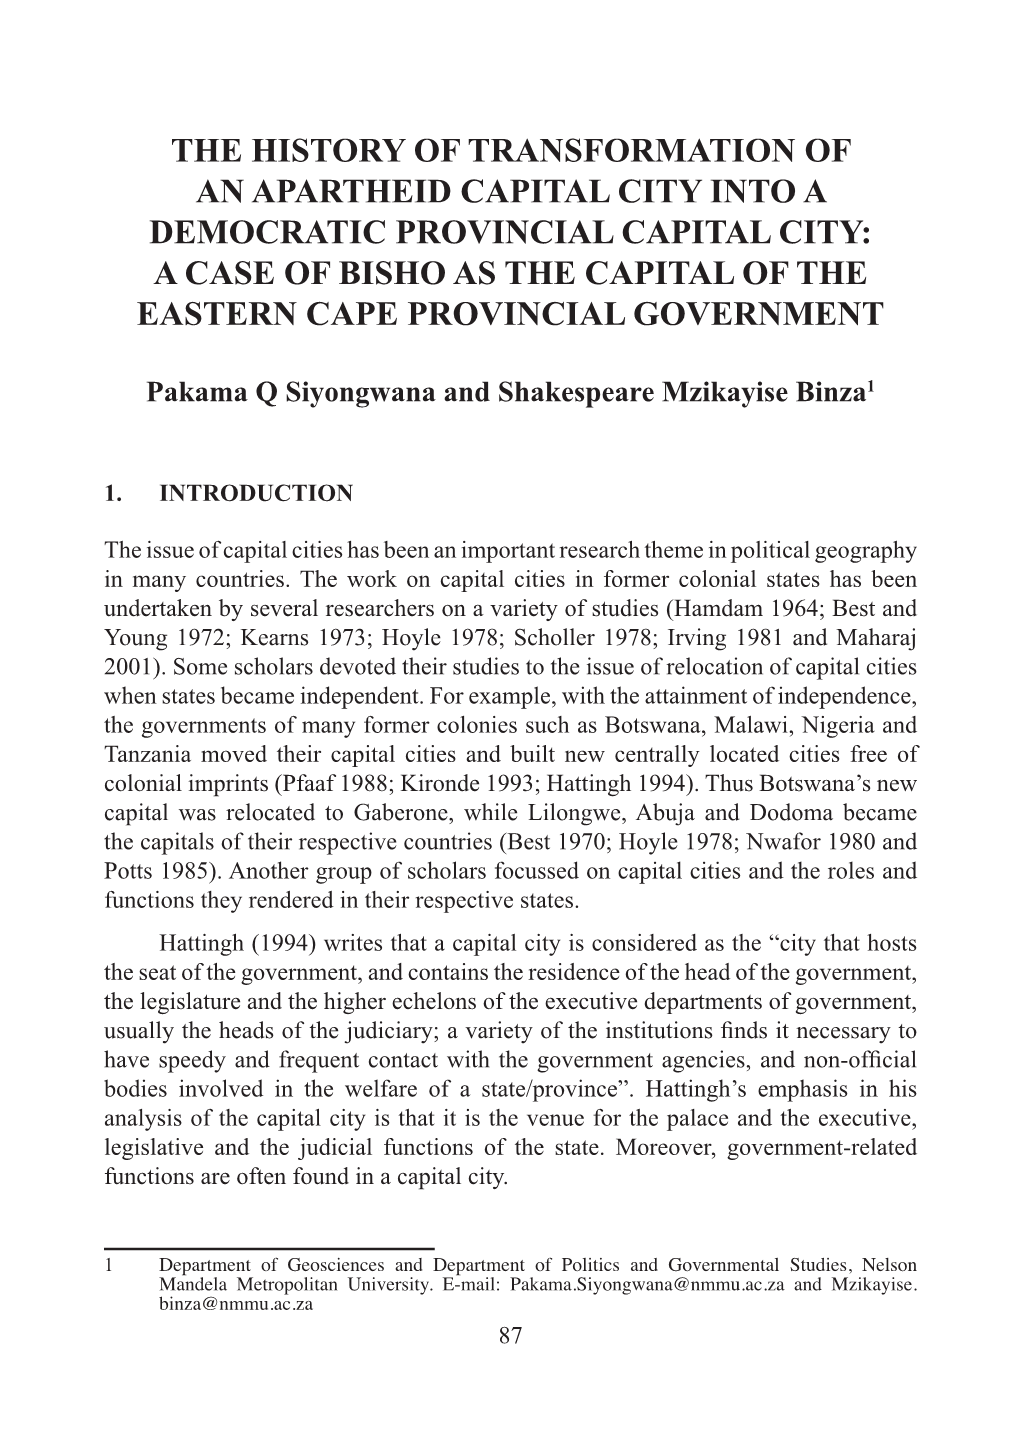 A Case of Bisho As the Capital of the Eastern Cape Provincial Government